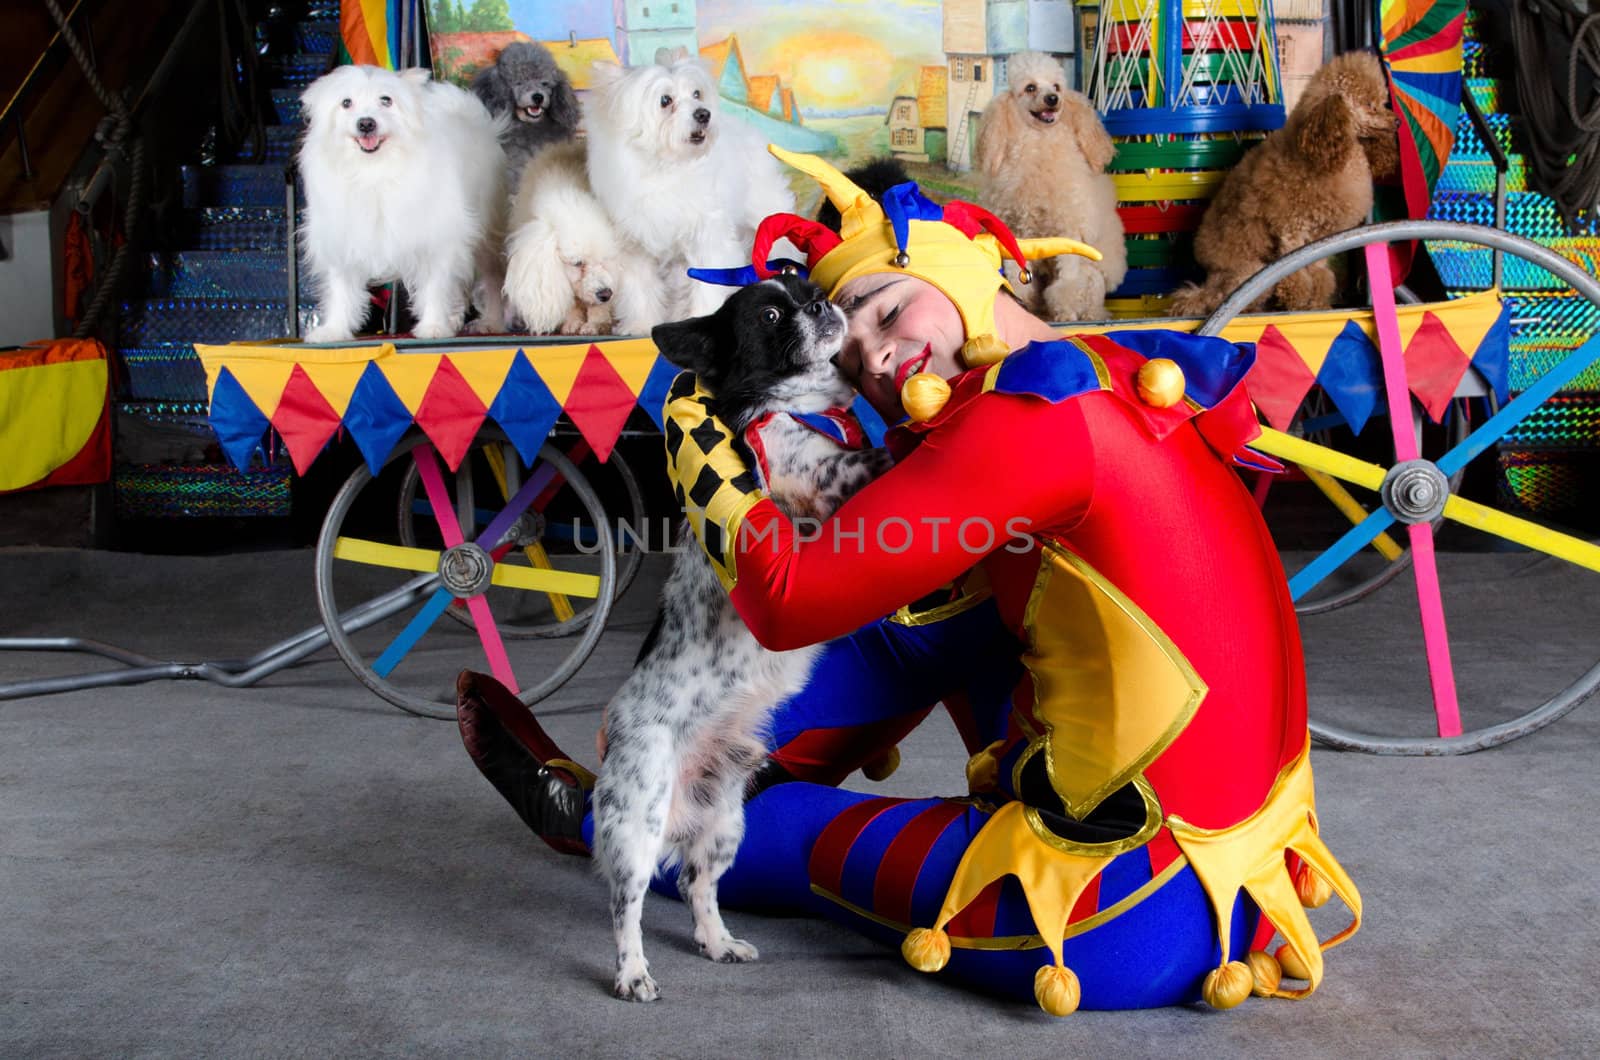 Smiling harlequin with closed eyes embraces his small dog. At the background group of dogs and carriage